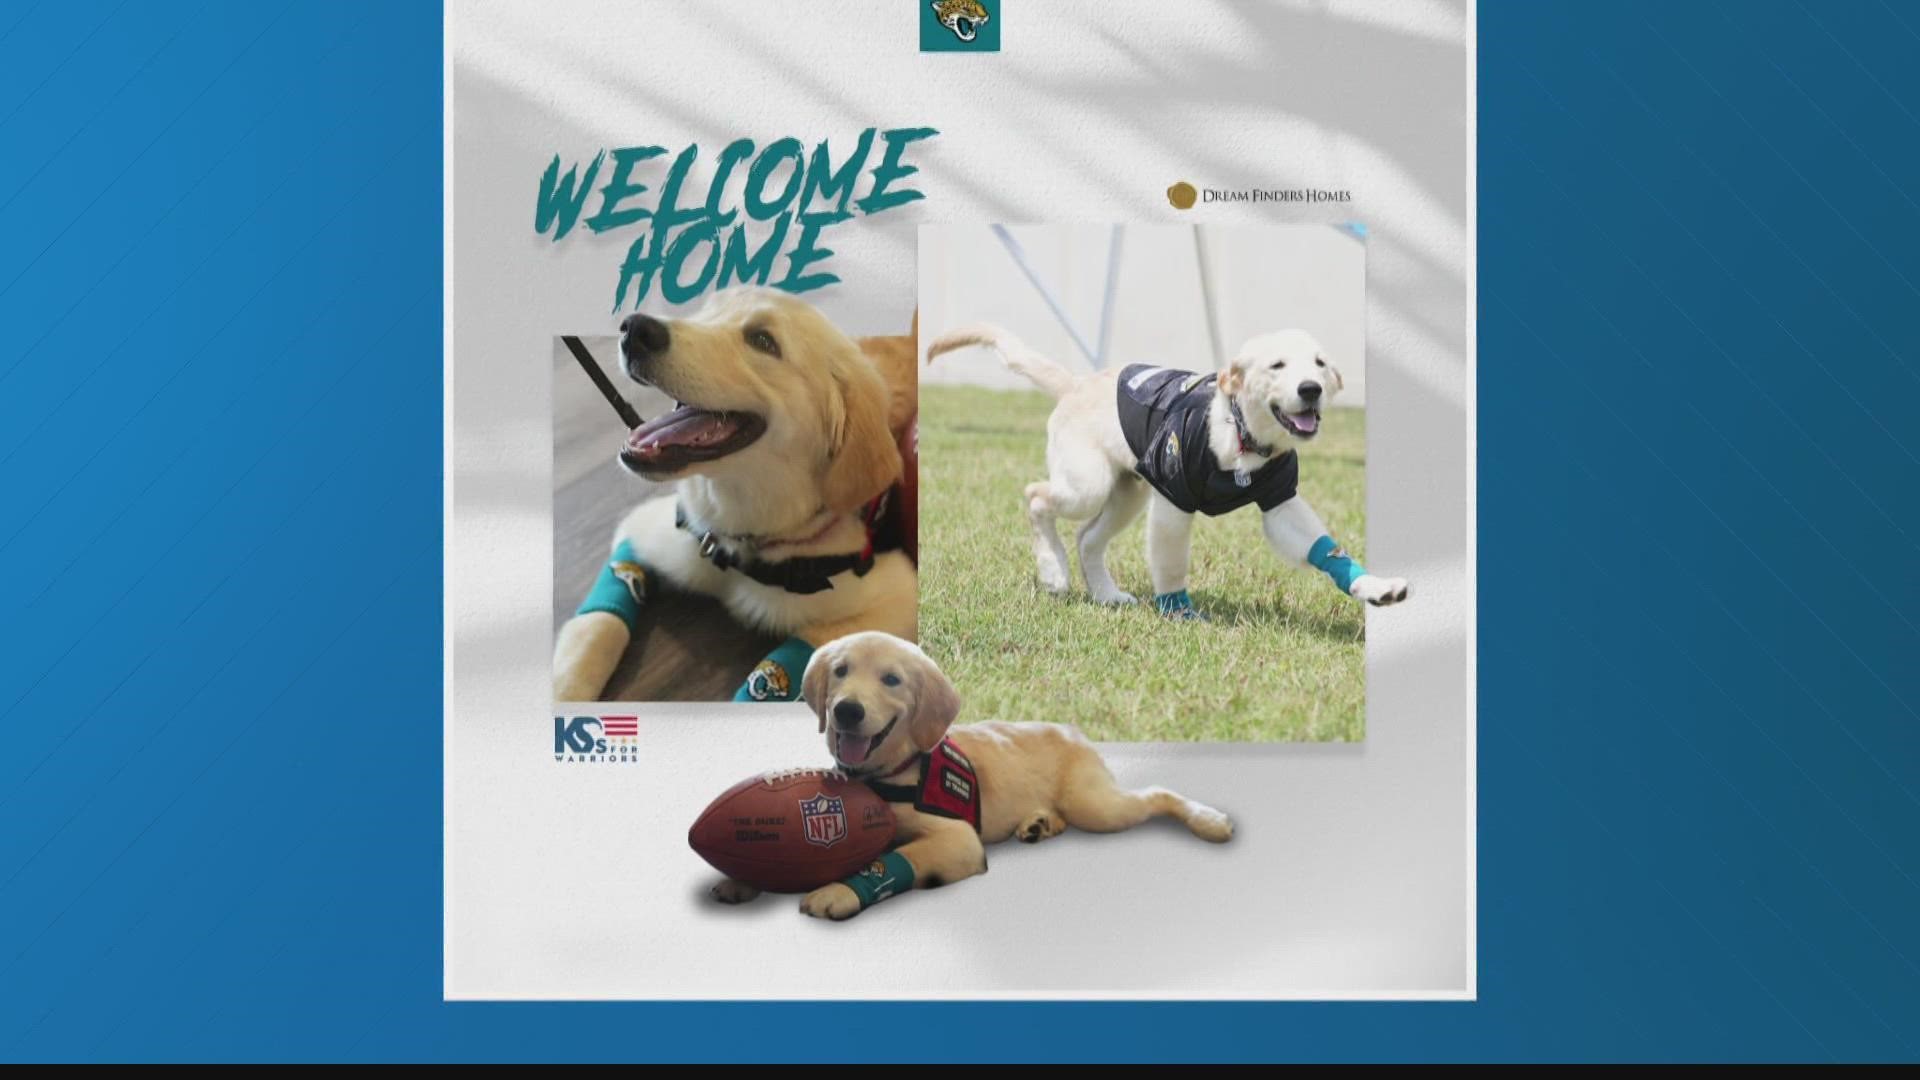 The Jacksonville Jaguars are asking for help in finding a name for their new Warriors puppy. Some good suggestions already in.